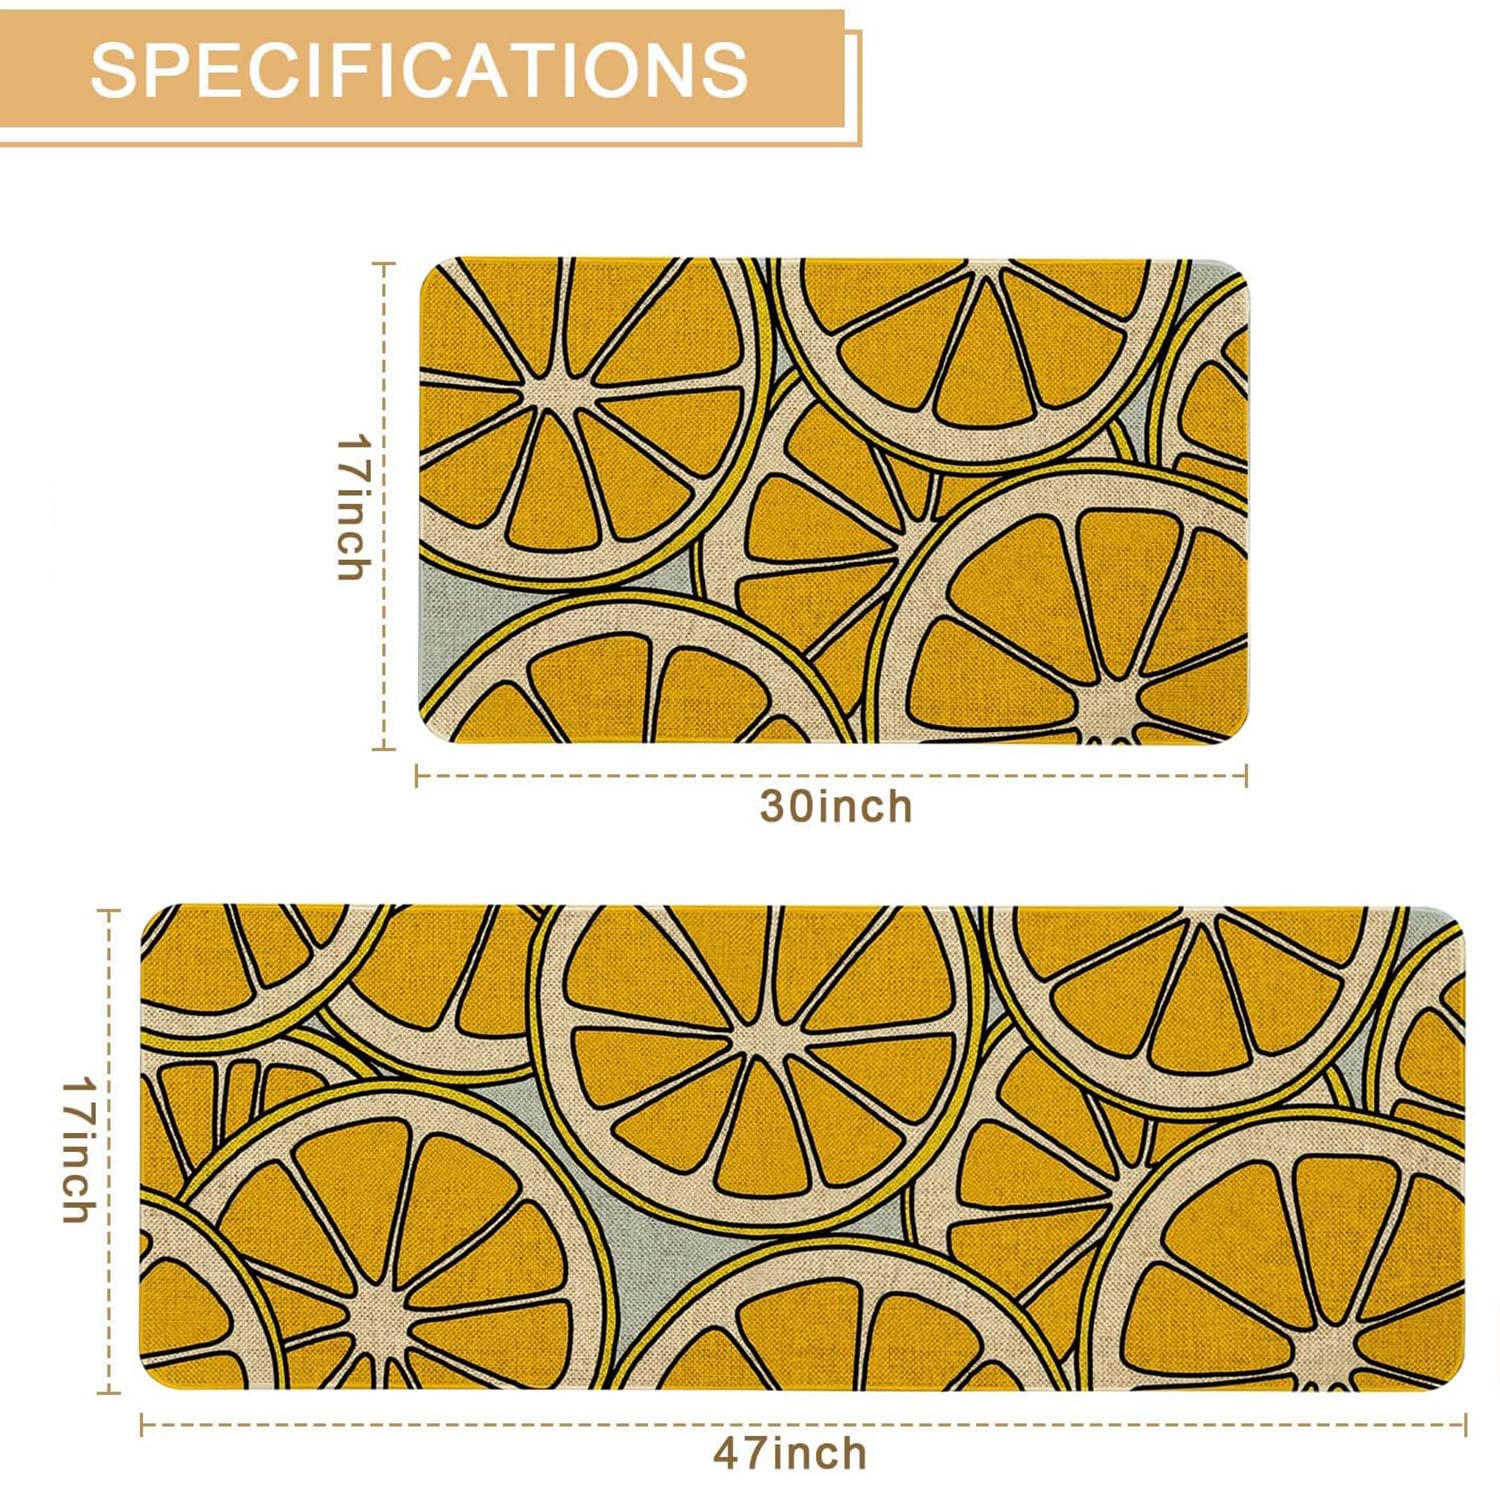 Mloabuc® Yellow Lemon Decorative Kitchen Mats Set of 2, Anti Fatigue Waterproof Stain Resistant Floor Rug Non Slip Cushioned Floor Mat - 17x29 and 17x47 Inch